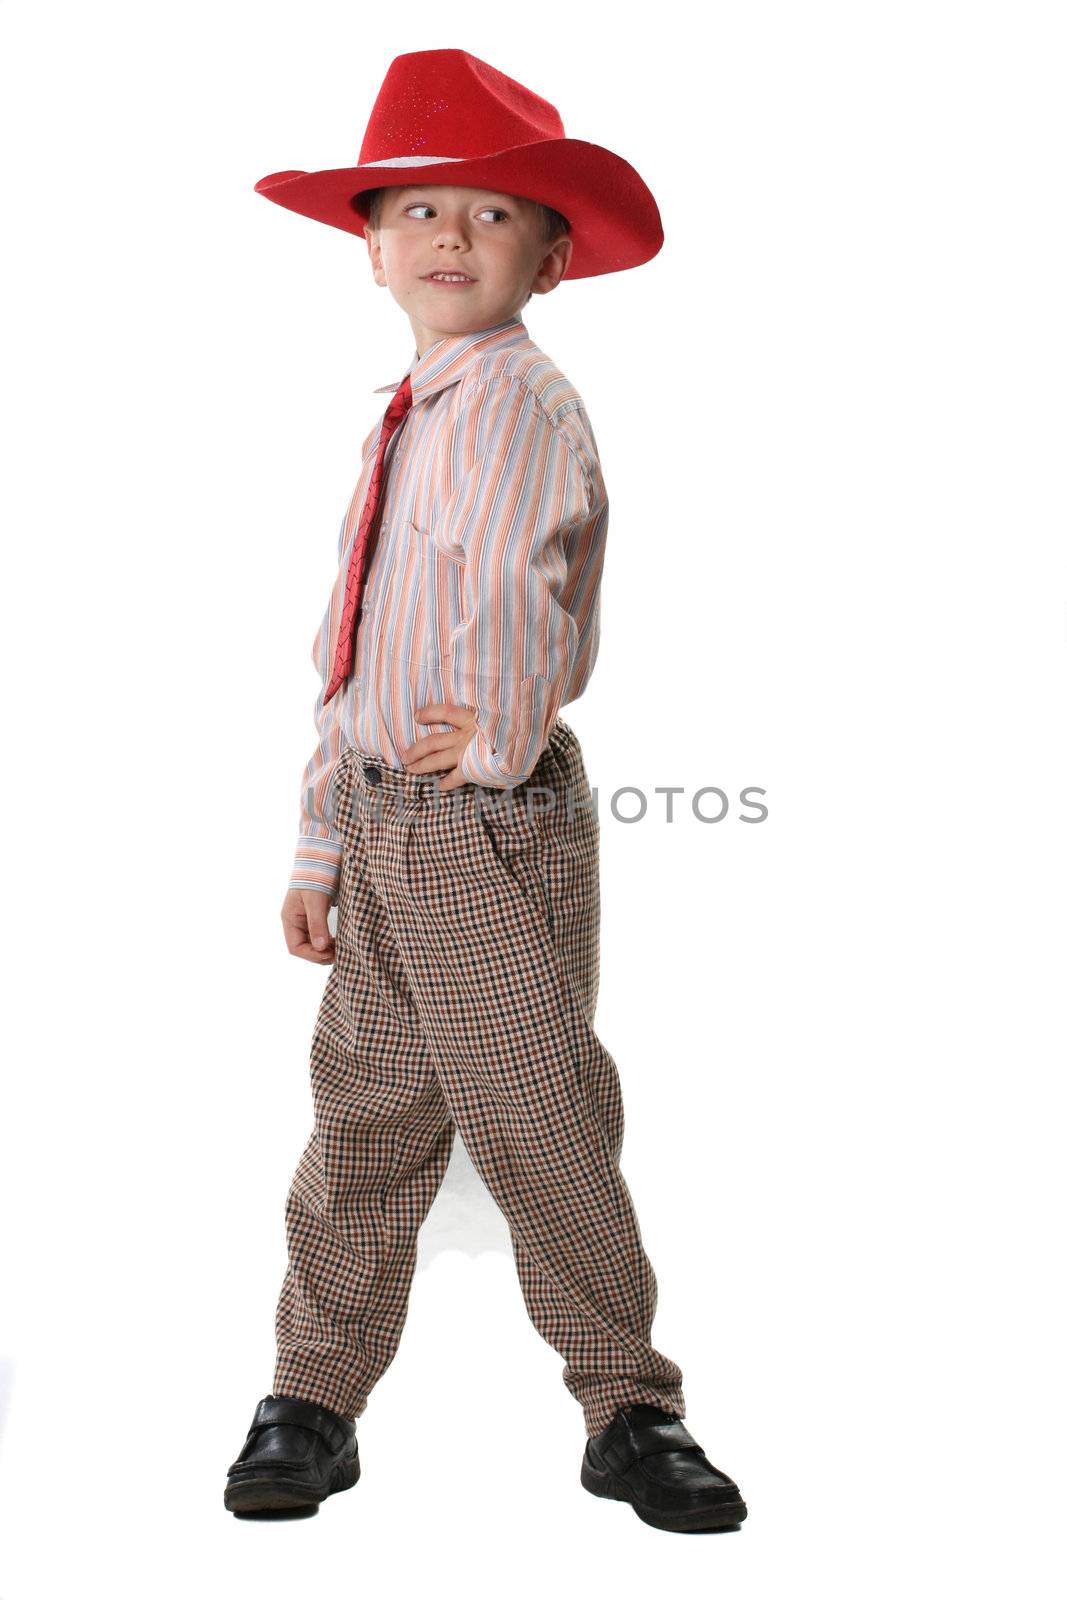 The boy in a cowboy's hat and a red tie